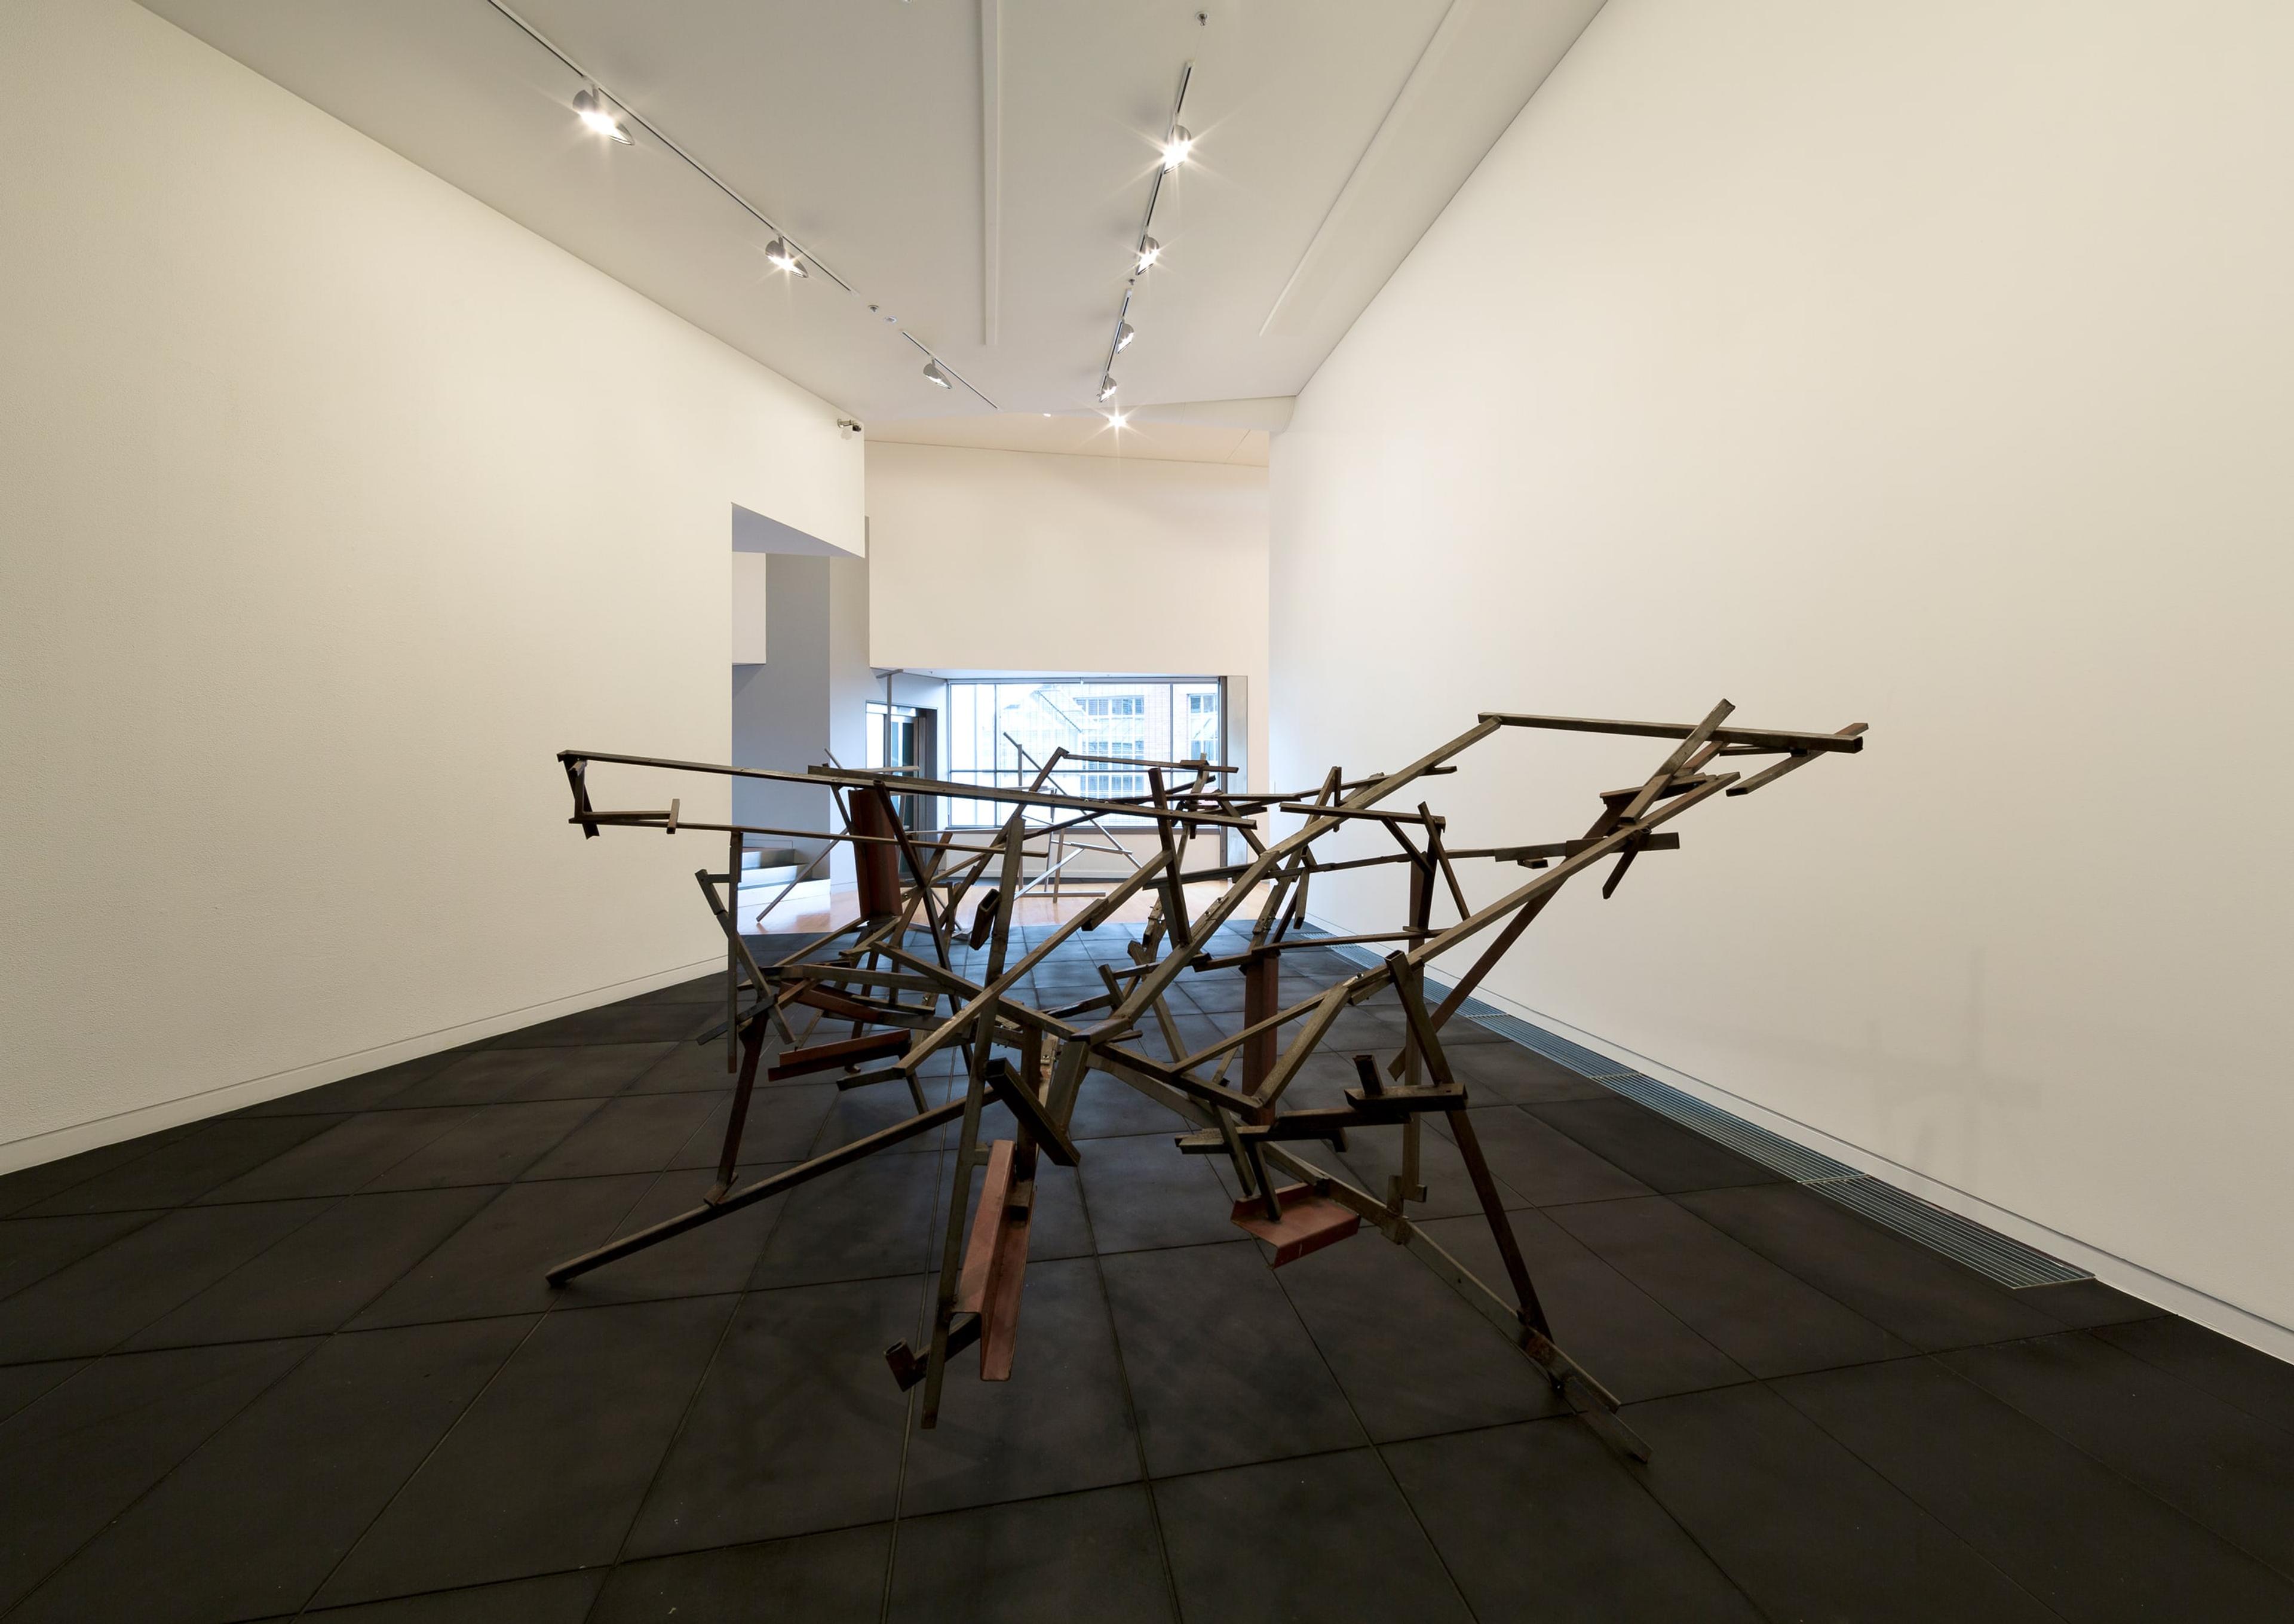 Installation view of John Panting: Spatial Constructions at the Adam Art Gallery, showing 6.08 (Untitled VIII), 1973–74, steel, 244 x 366 x 244cm. Collection of Museum of New Zealand Te Papa Tongarewa, 1977-0006-1. Photo: Shaun Waugh.